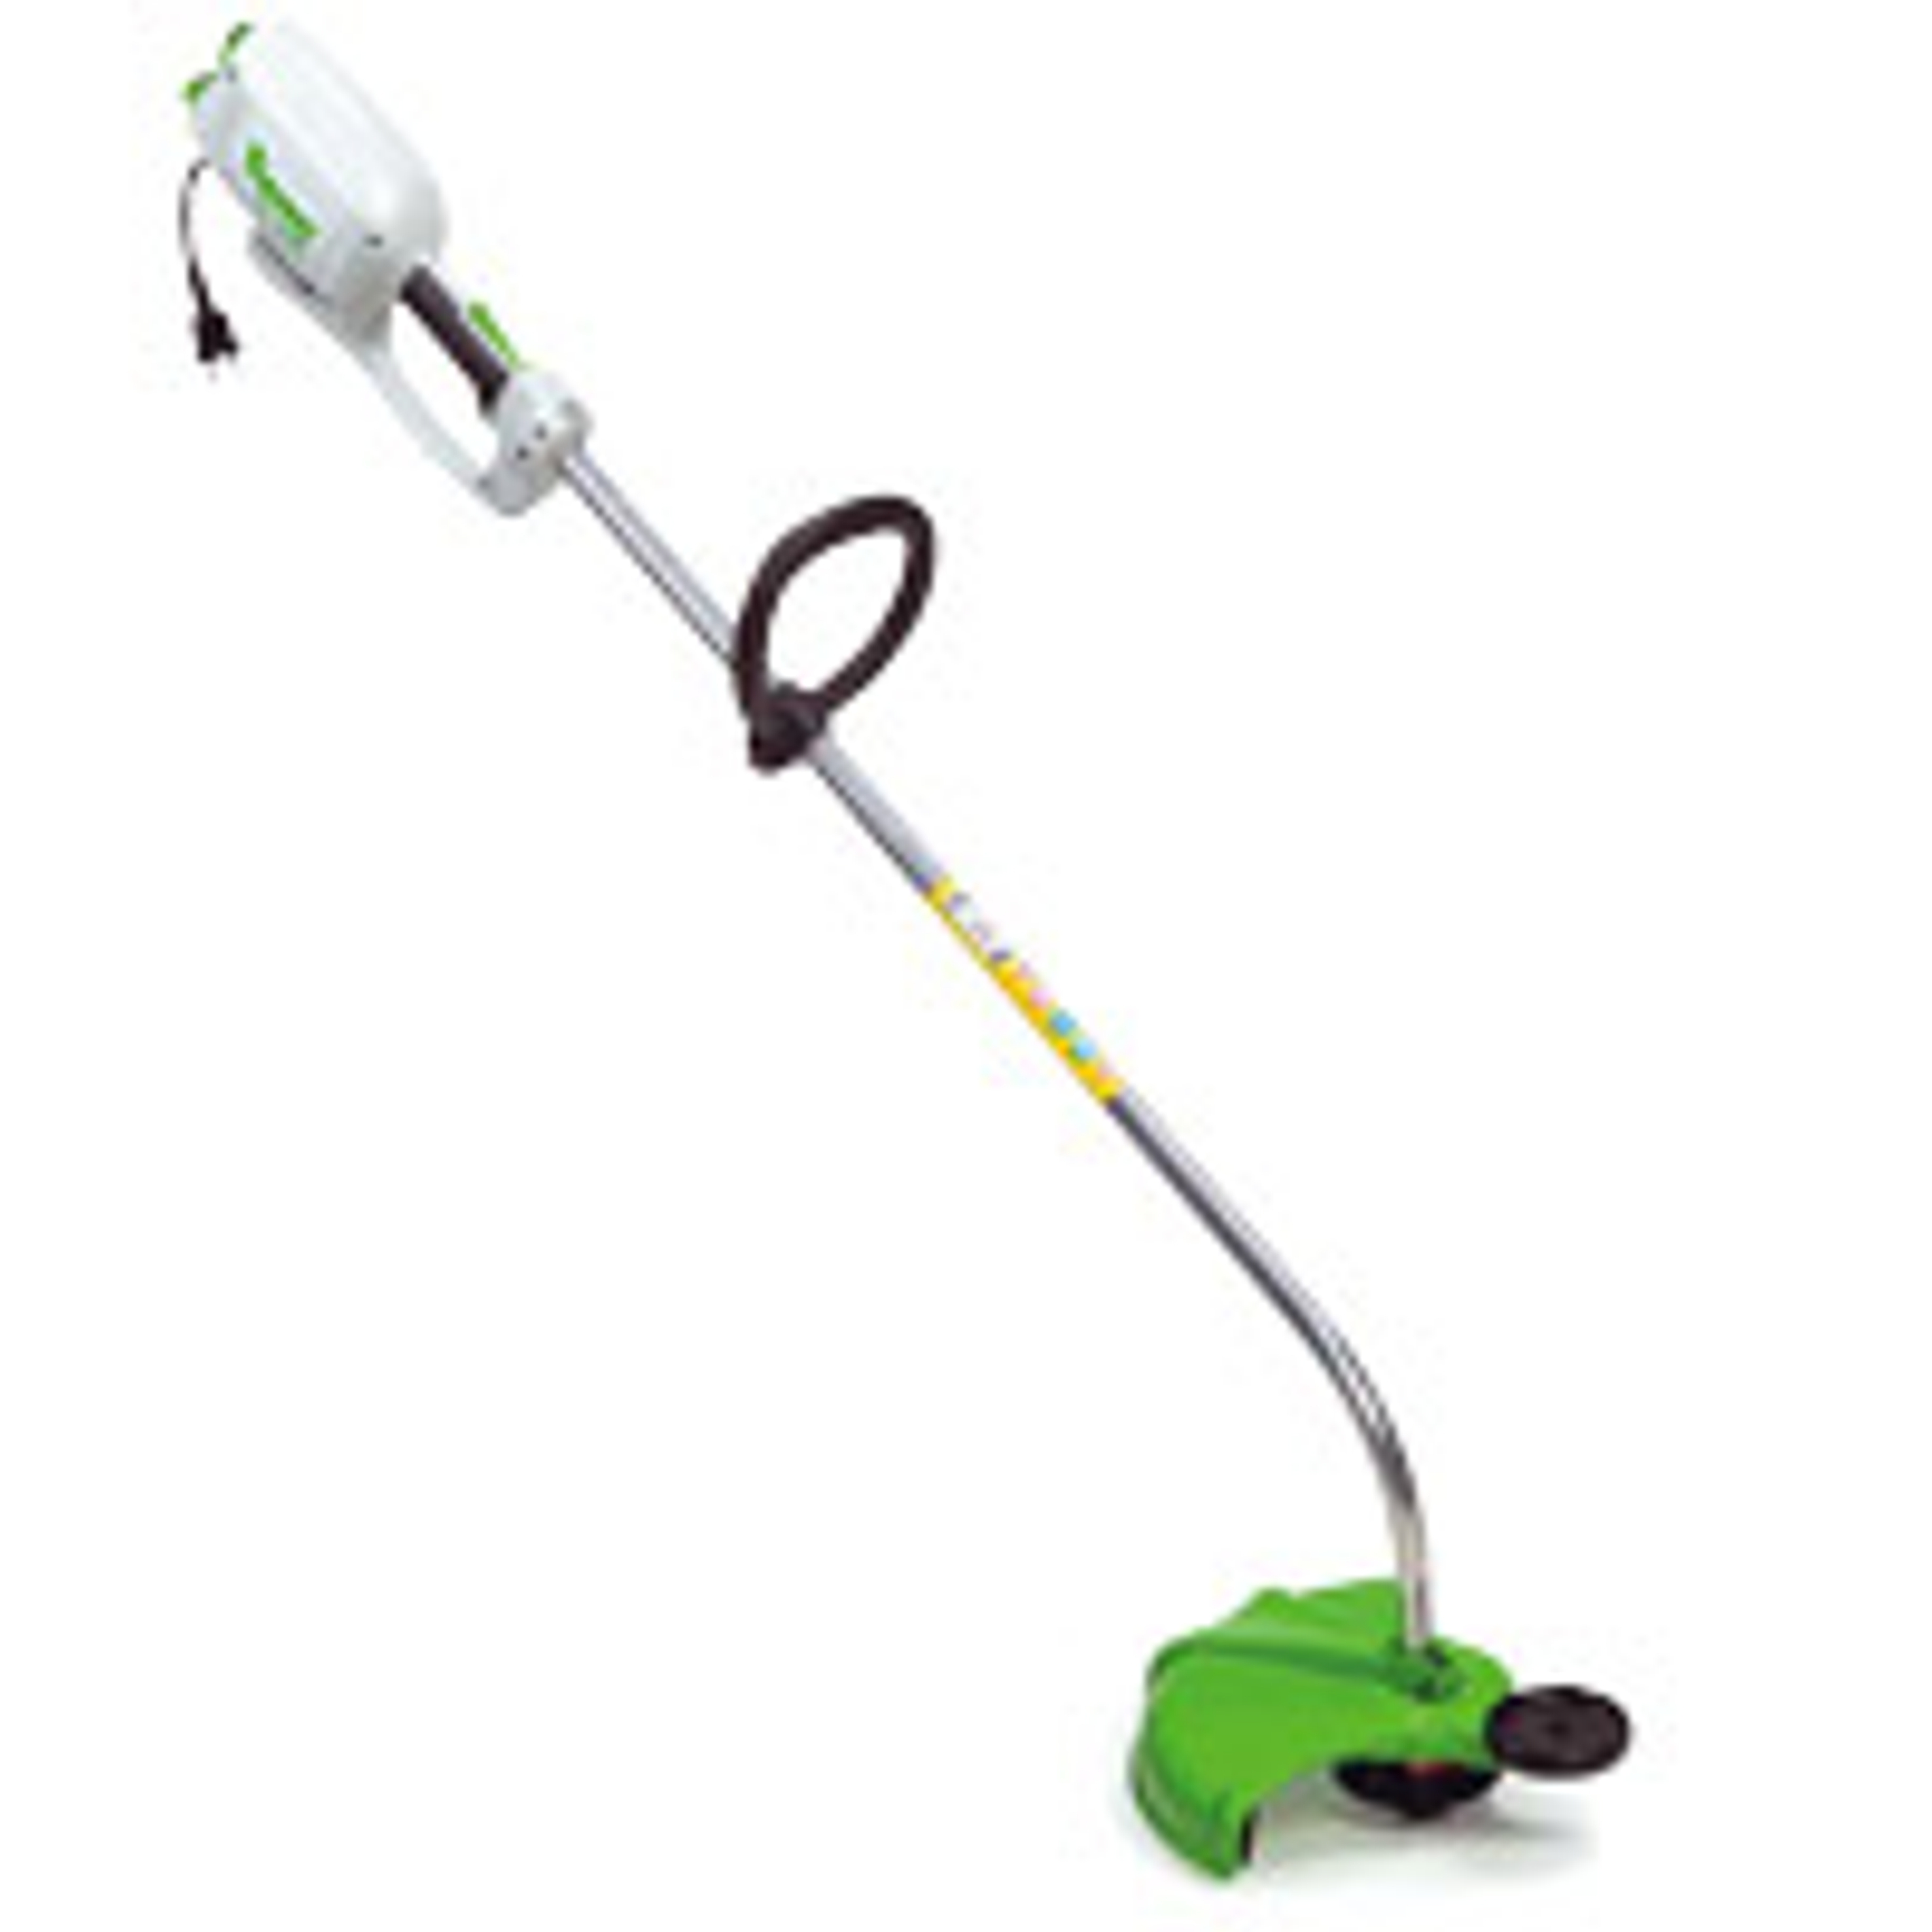 Viking TE 600 Electrical Grass Trimmer Parts